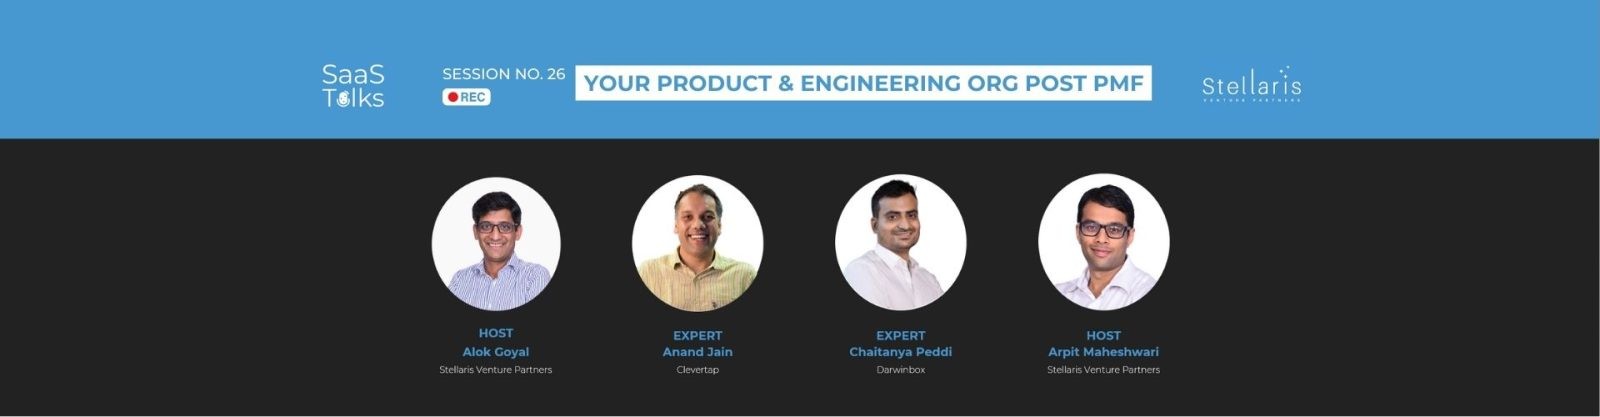 SaaS Talks #26: Your Product & Engineering Org Post PMF